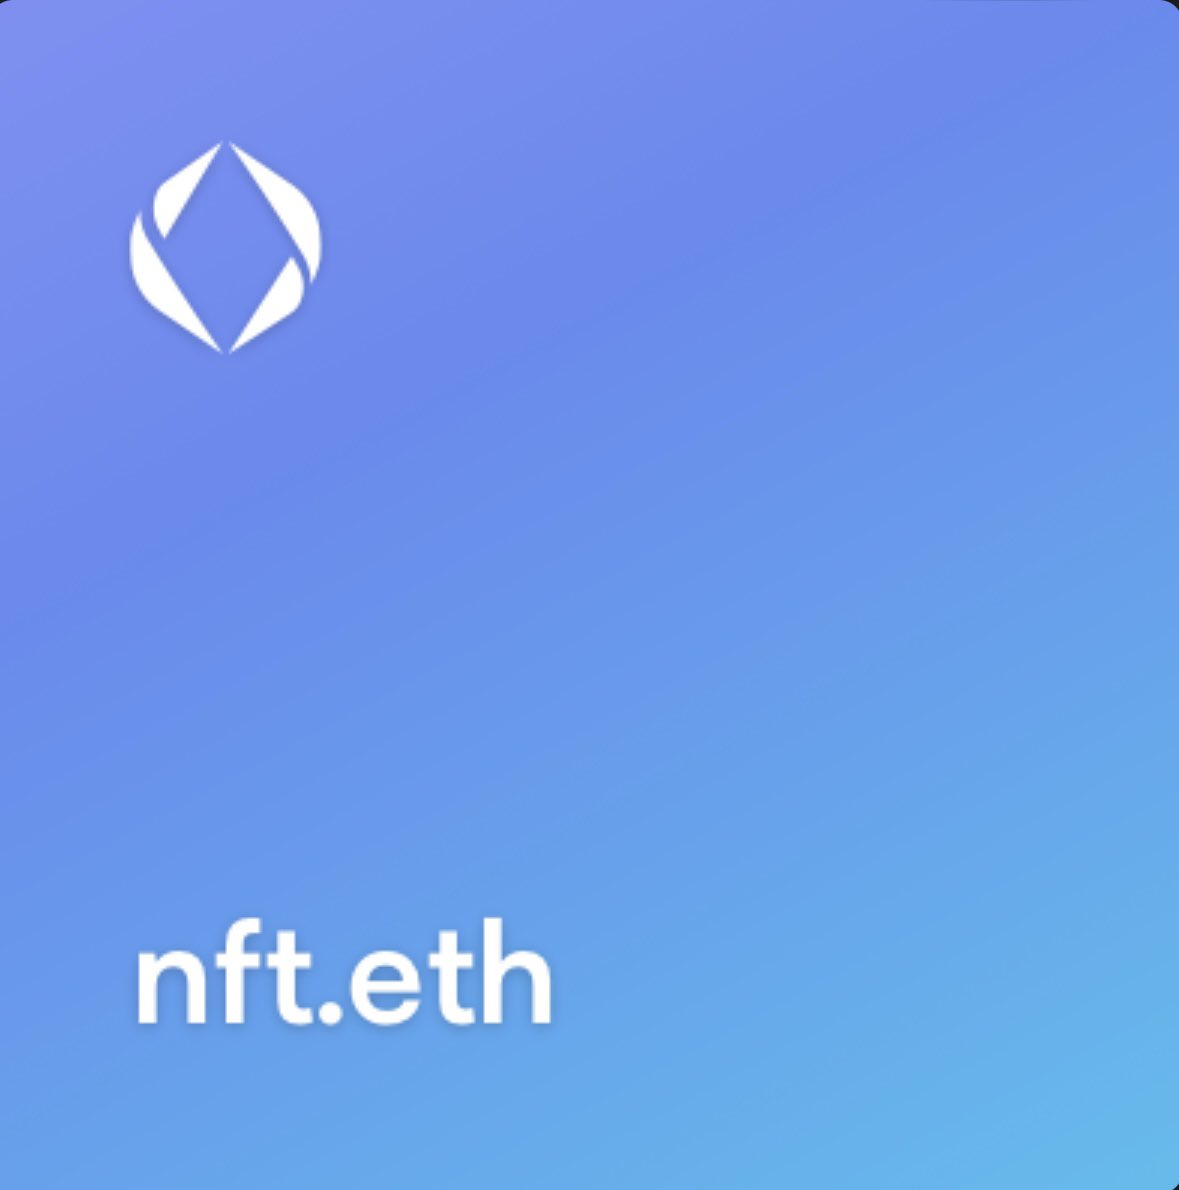 NFT.ETH LISTED EXCLUSIVELY ON Vision.io @ensvision ! @RocketXLabsENS client. One of the top 5 names in all of web3. A bounty of $75,000 if anyone brings us a buyer ( with verification). Yes we will pay you $75,000 if you bring us a buyer. ! #ens #web3names…